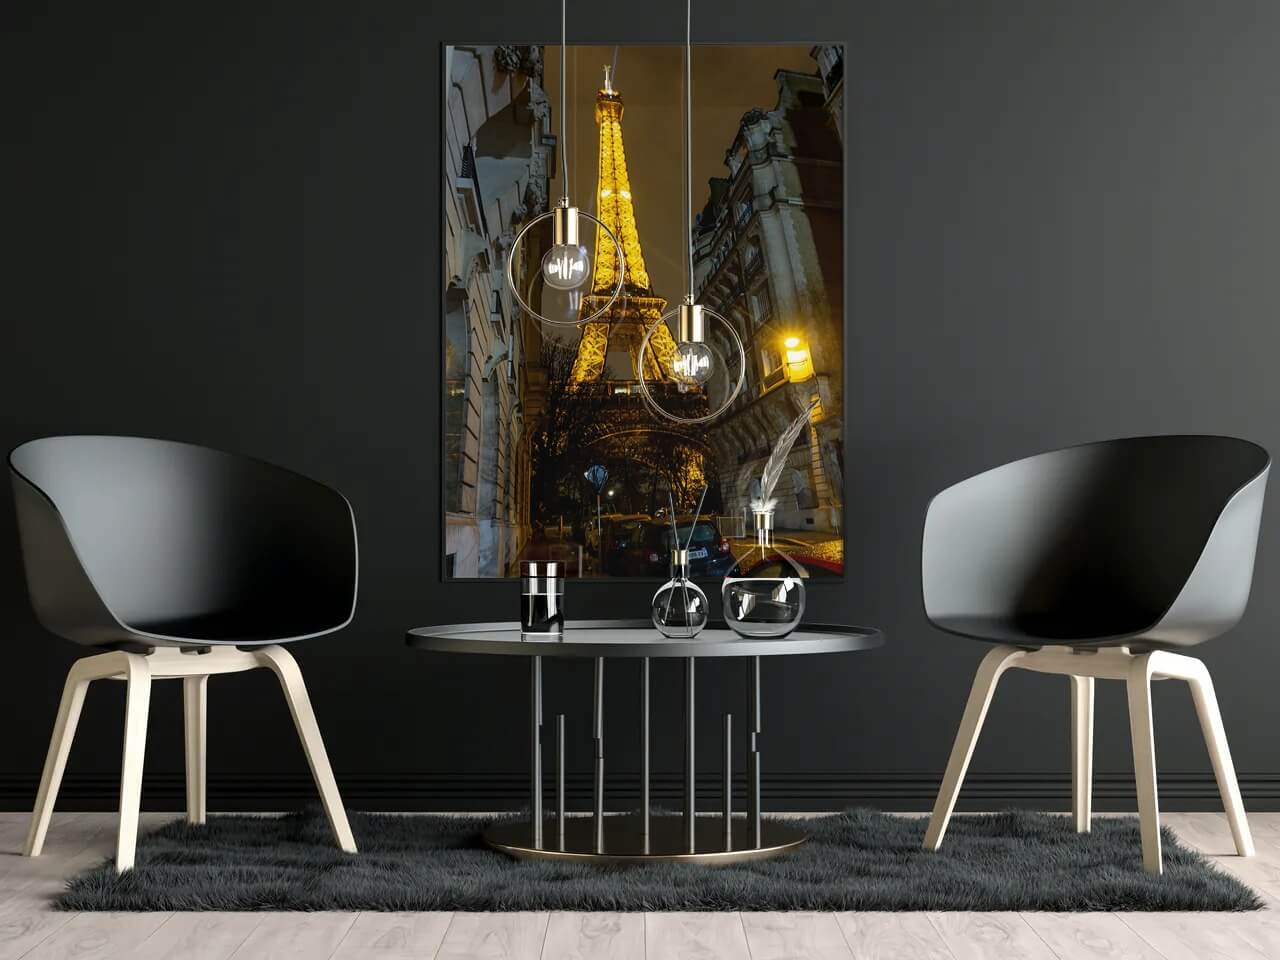  Banner image featuring Eiffel Tower photography on canvas behind a small table and two stylish black chairs 